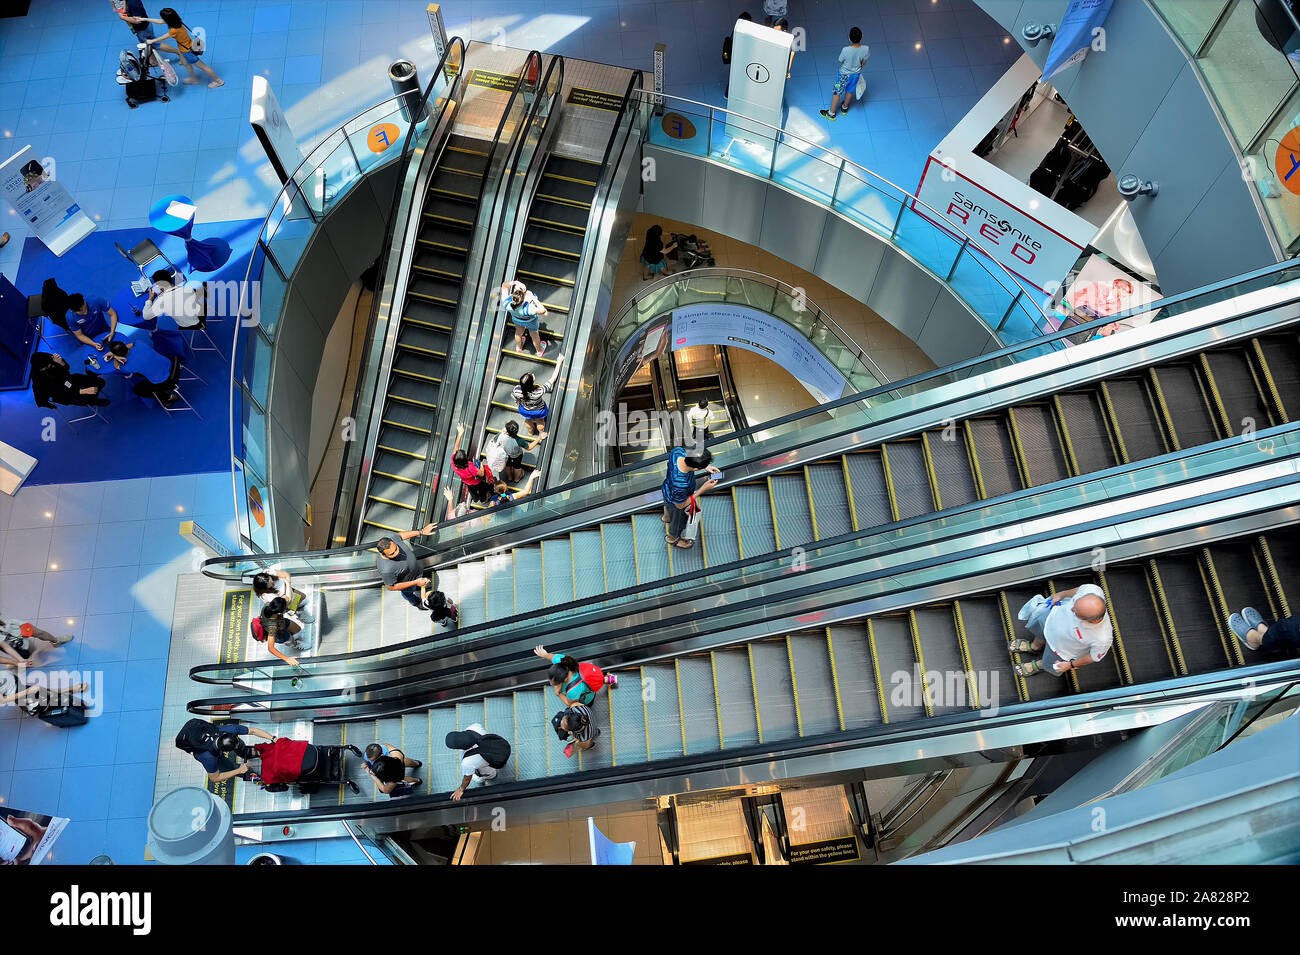 Singapore - September 29 2019: Aerial view of modern escalator shaft at Vivo City shopping centre with shoppers Stock Photo